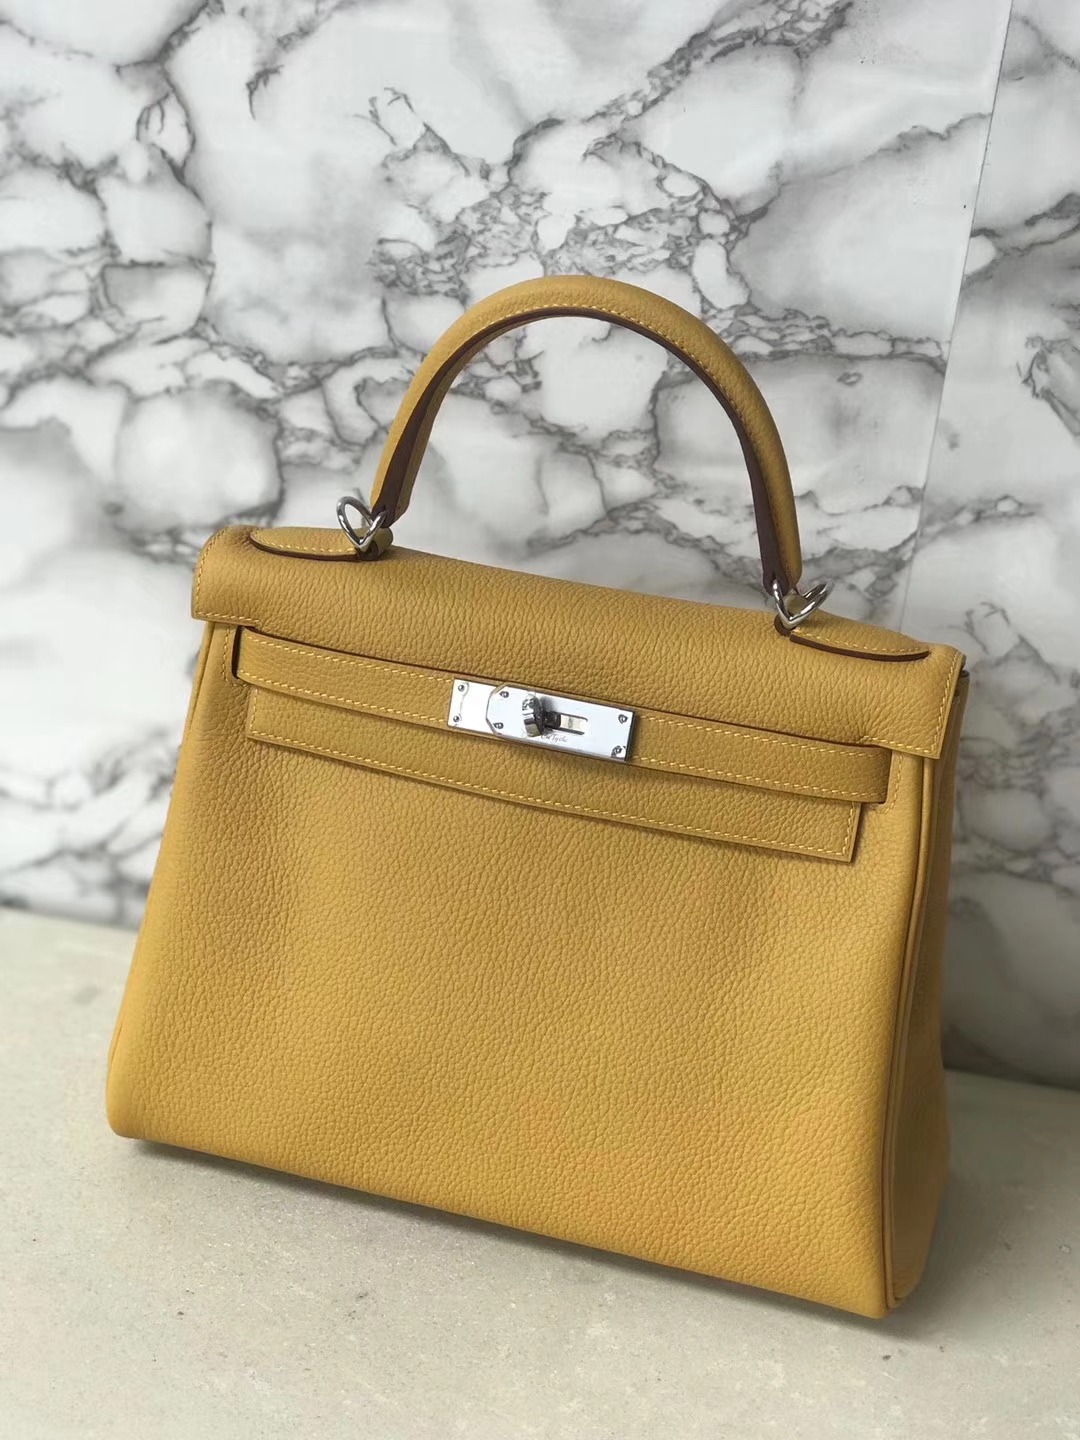 New Hermes 9D Ambre Yellow Togo Calf Kelly28CM Tote Bag Silver Hardware